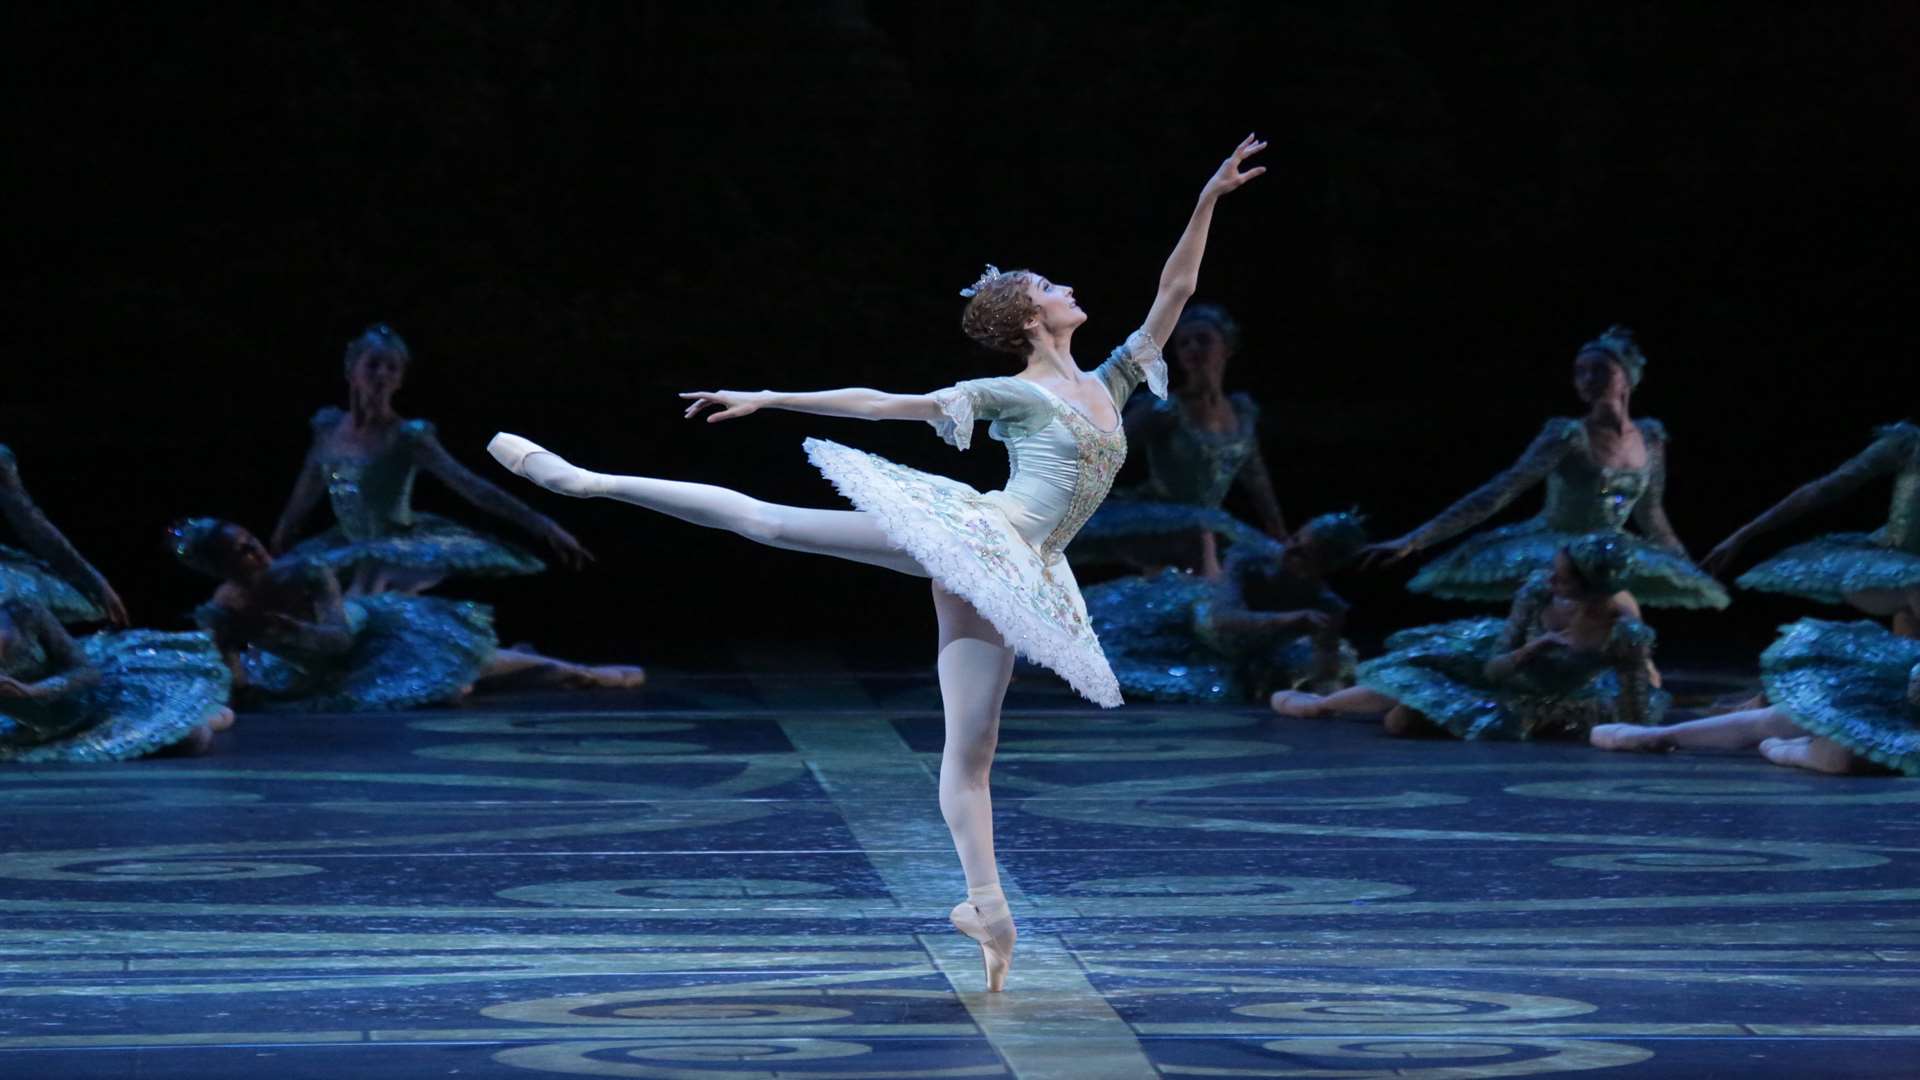 The world famous Bolshoi Ballet will be screened at Showcase Cinemas in Bluewater